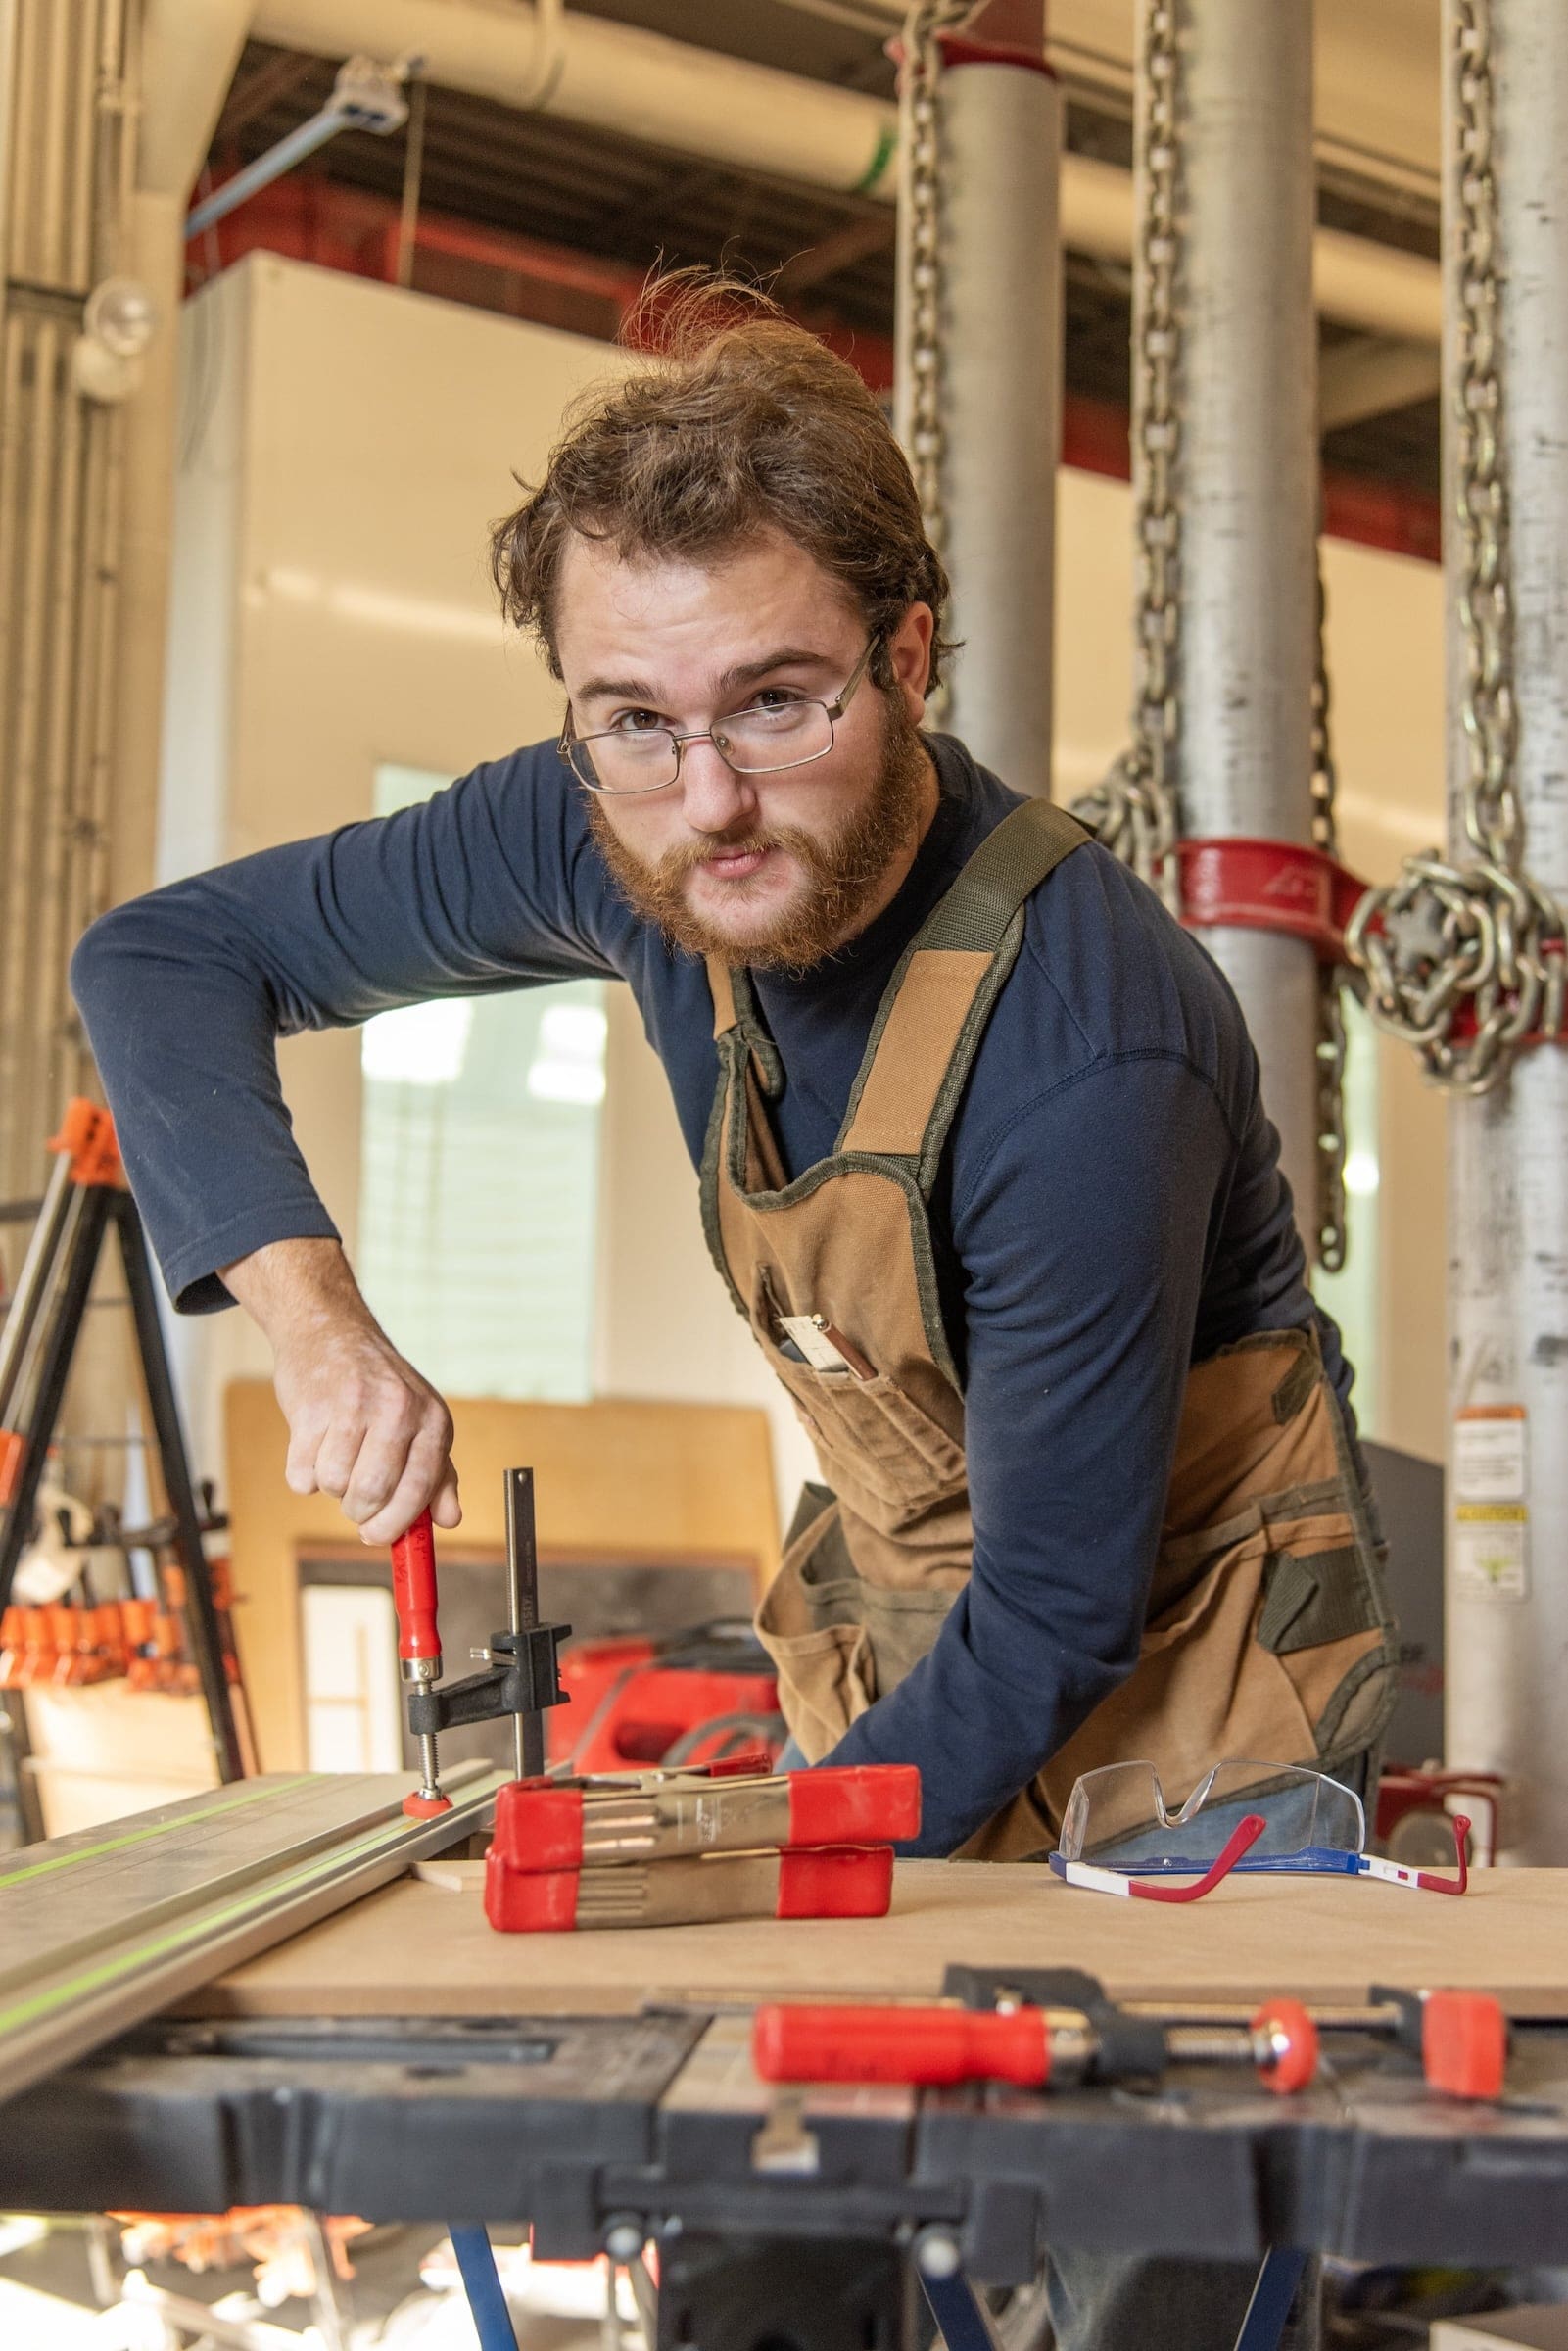 A student in the cabinetmaking and wood technology program at Thaddeus Stevens College.